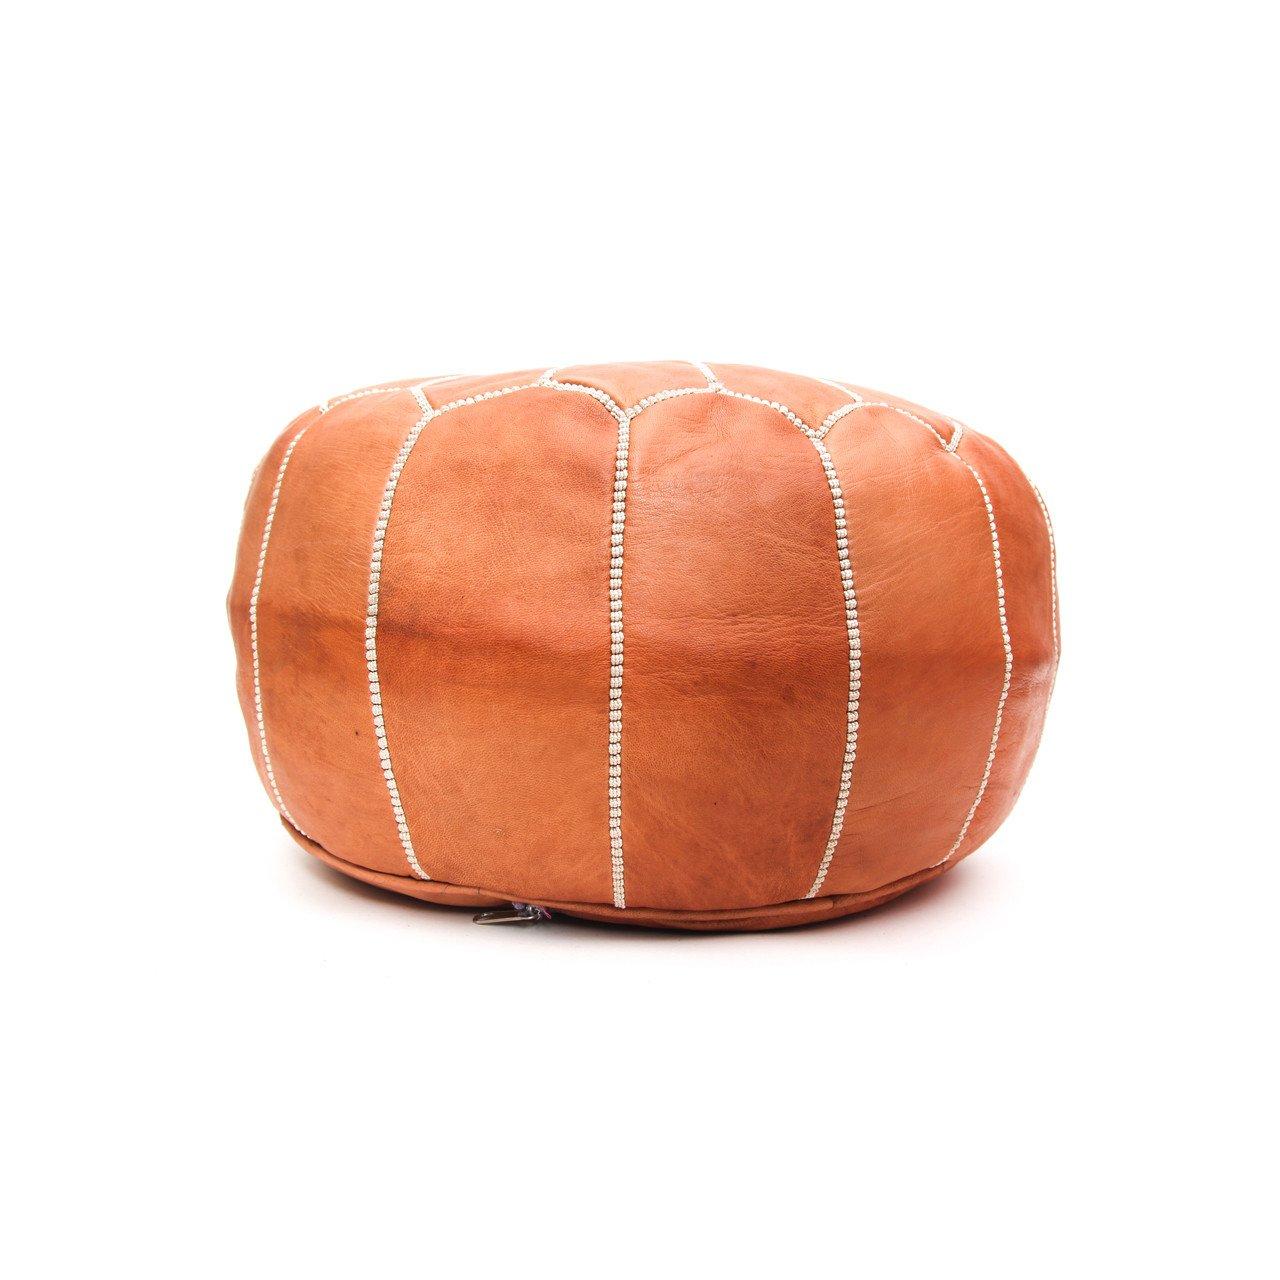 This eye-catching handstitched genuine tan leather pair of Moroccan Poufs will lend an air of regal majesty to your den or living room. Handcrafted in leather by master artisans and boasting a resplendent arabesque pattern, this pair of poufs is